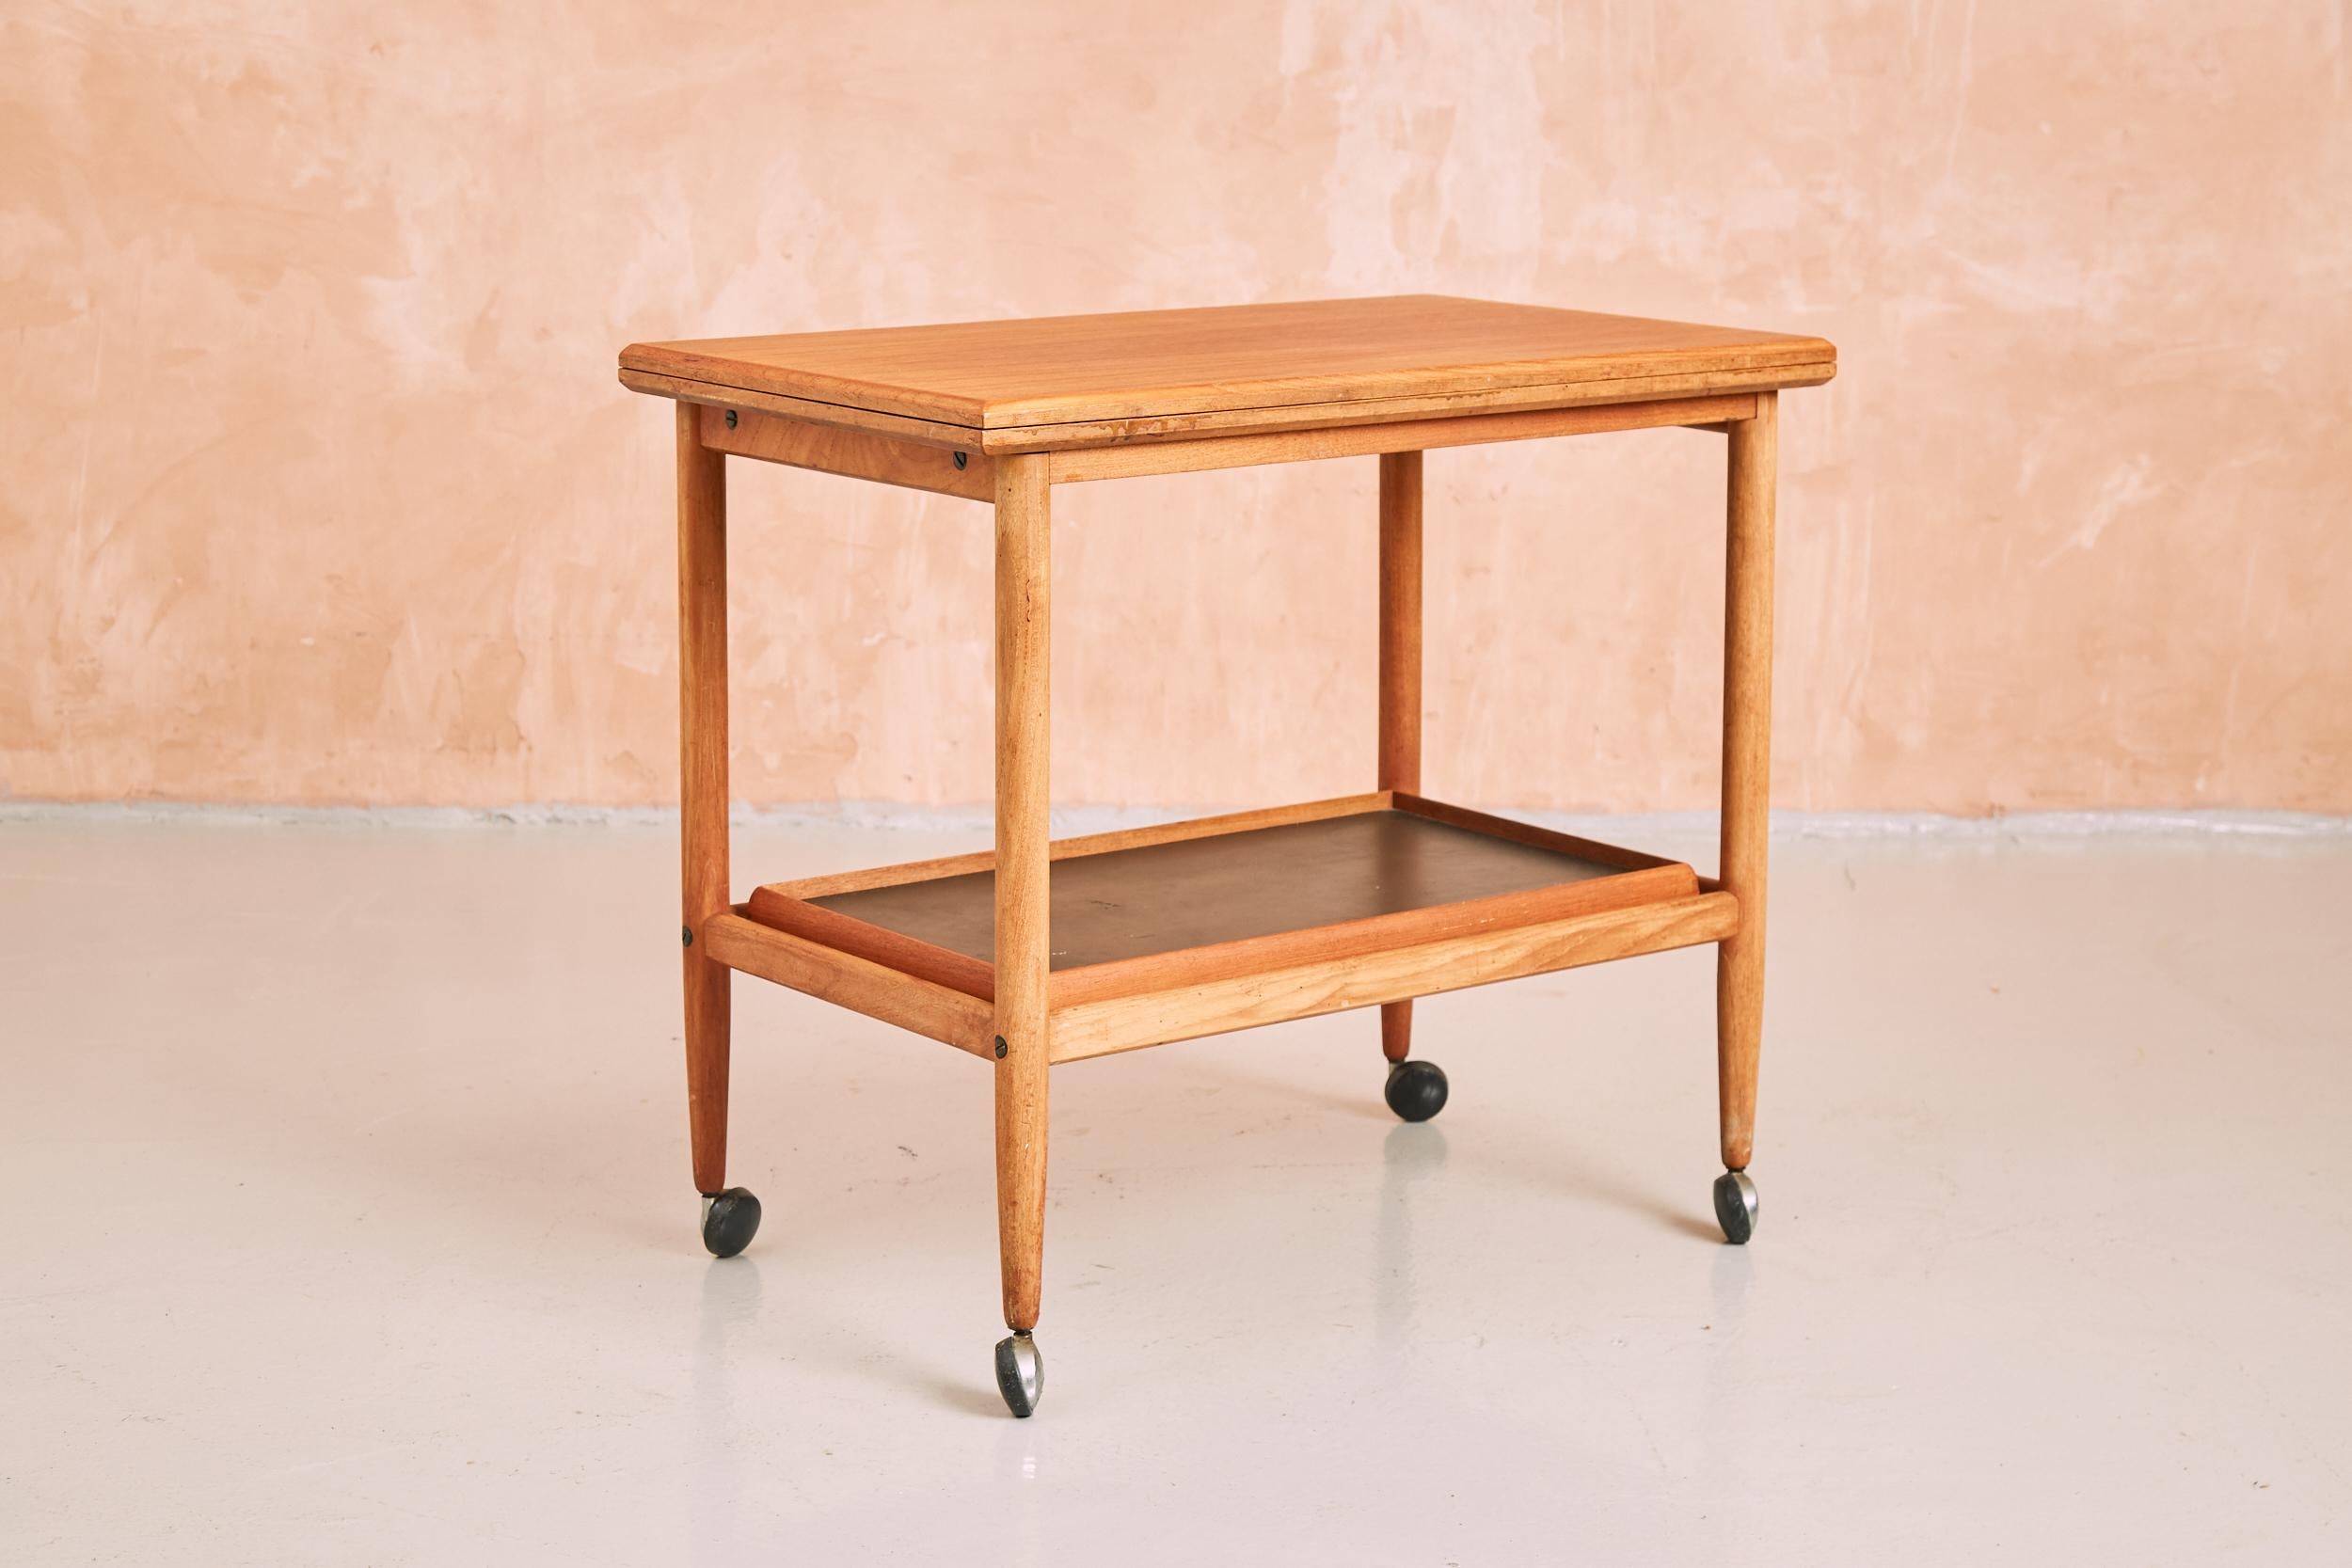 A vintage Danish side table/serving trolley set on casters with fold-out top and removable serving tray. This convenient and rare piece of mid century design is produced in teak and features a revolving, fold-out top, with attractive exposed brass